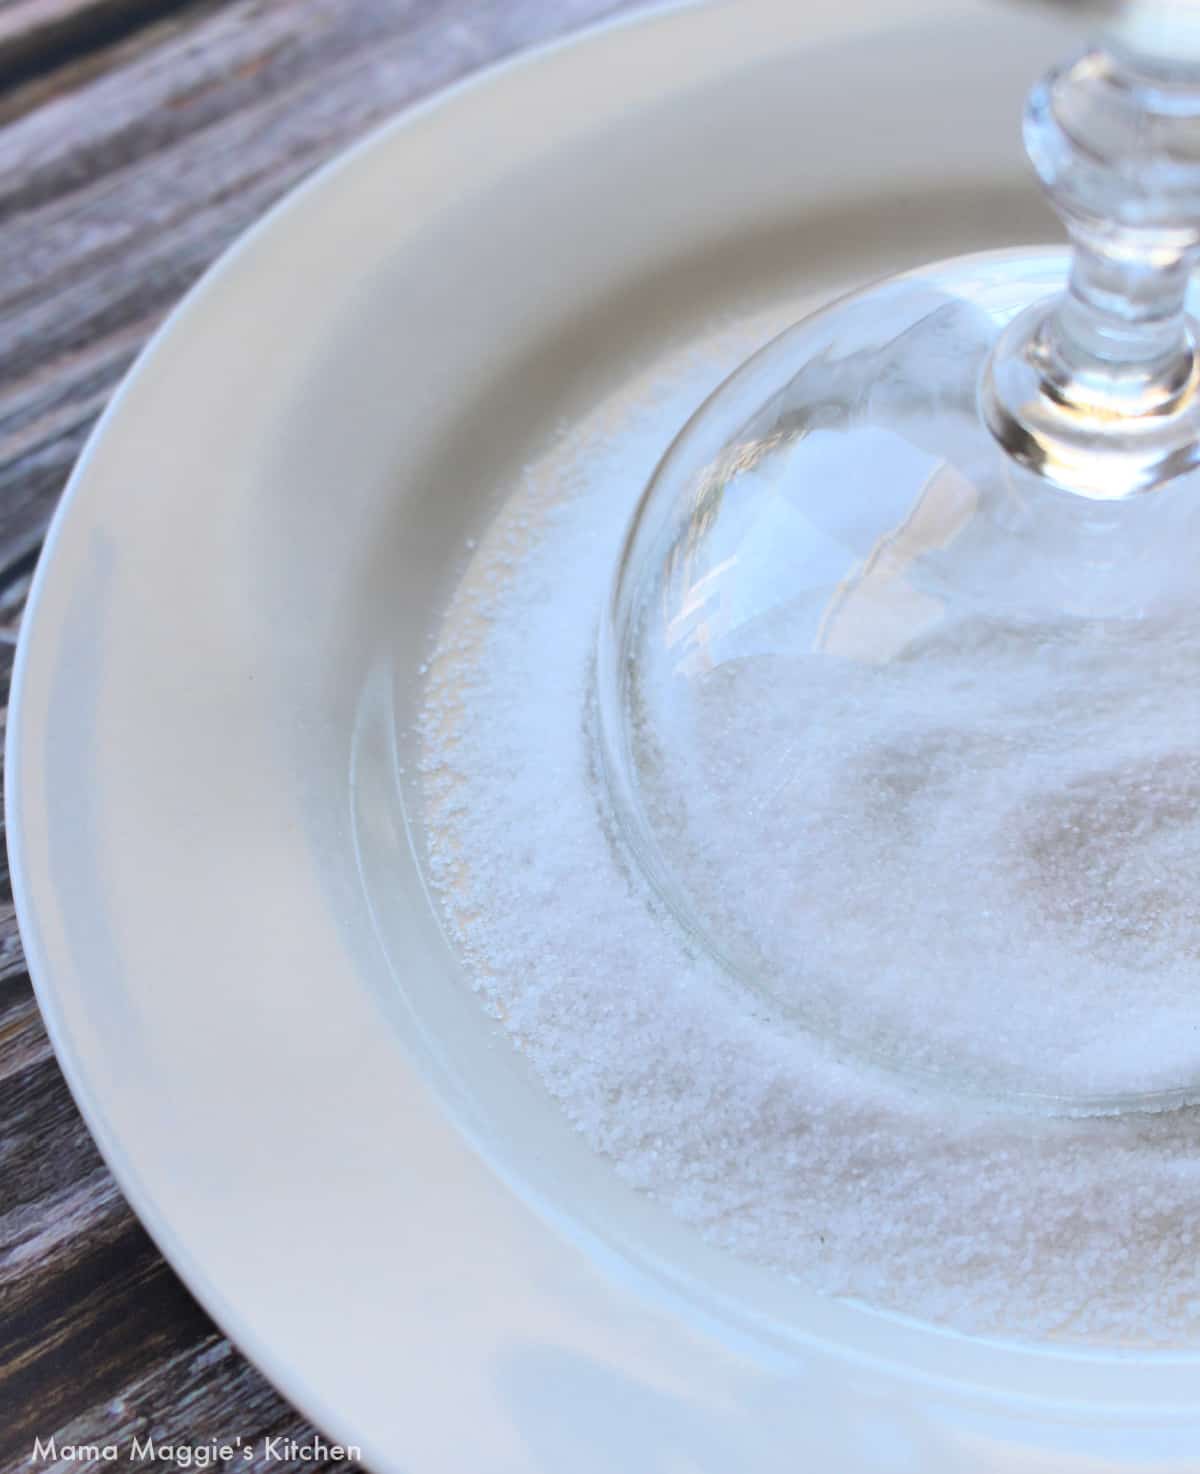 A glass turned upside down on a plate with salt.